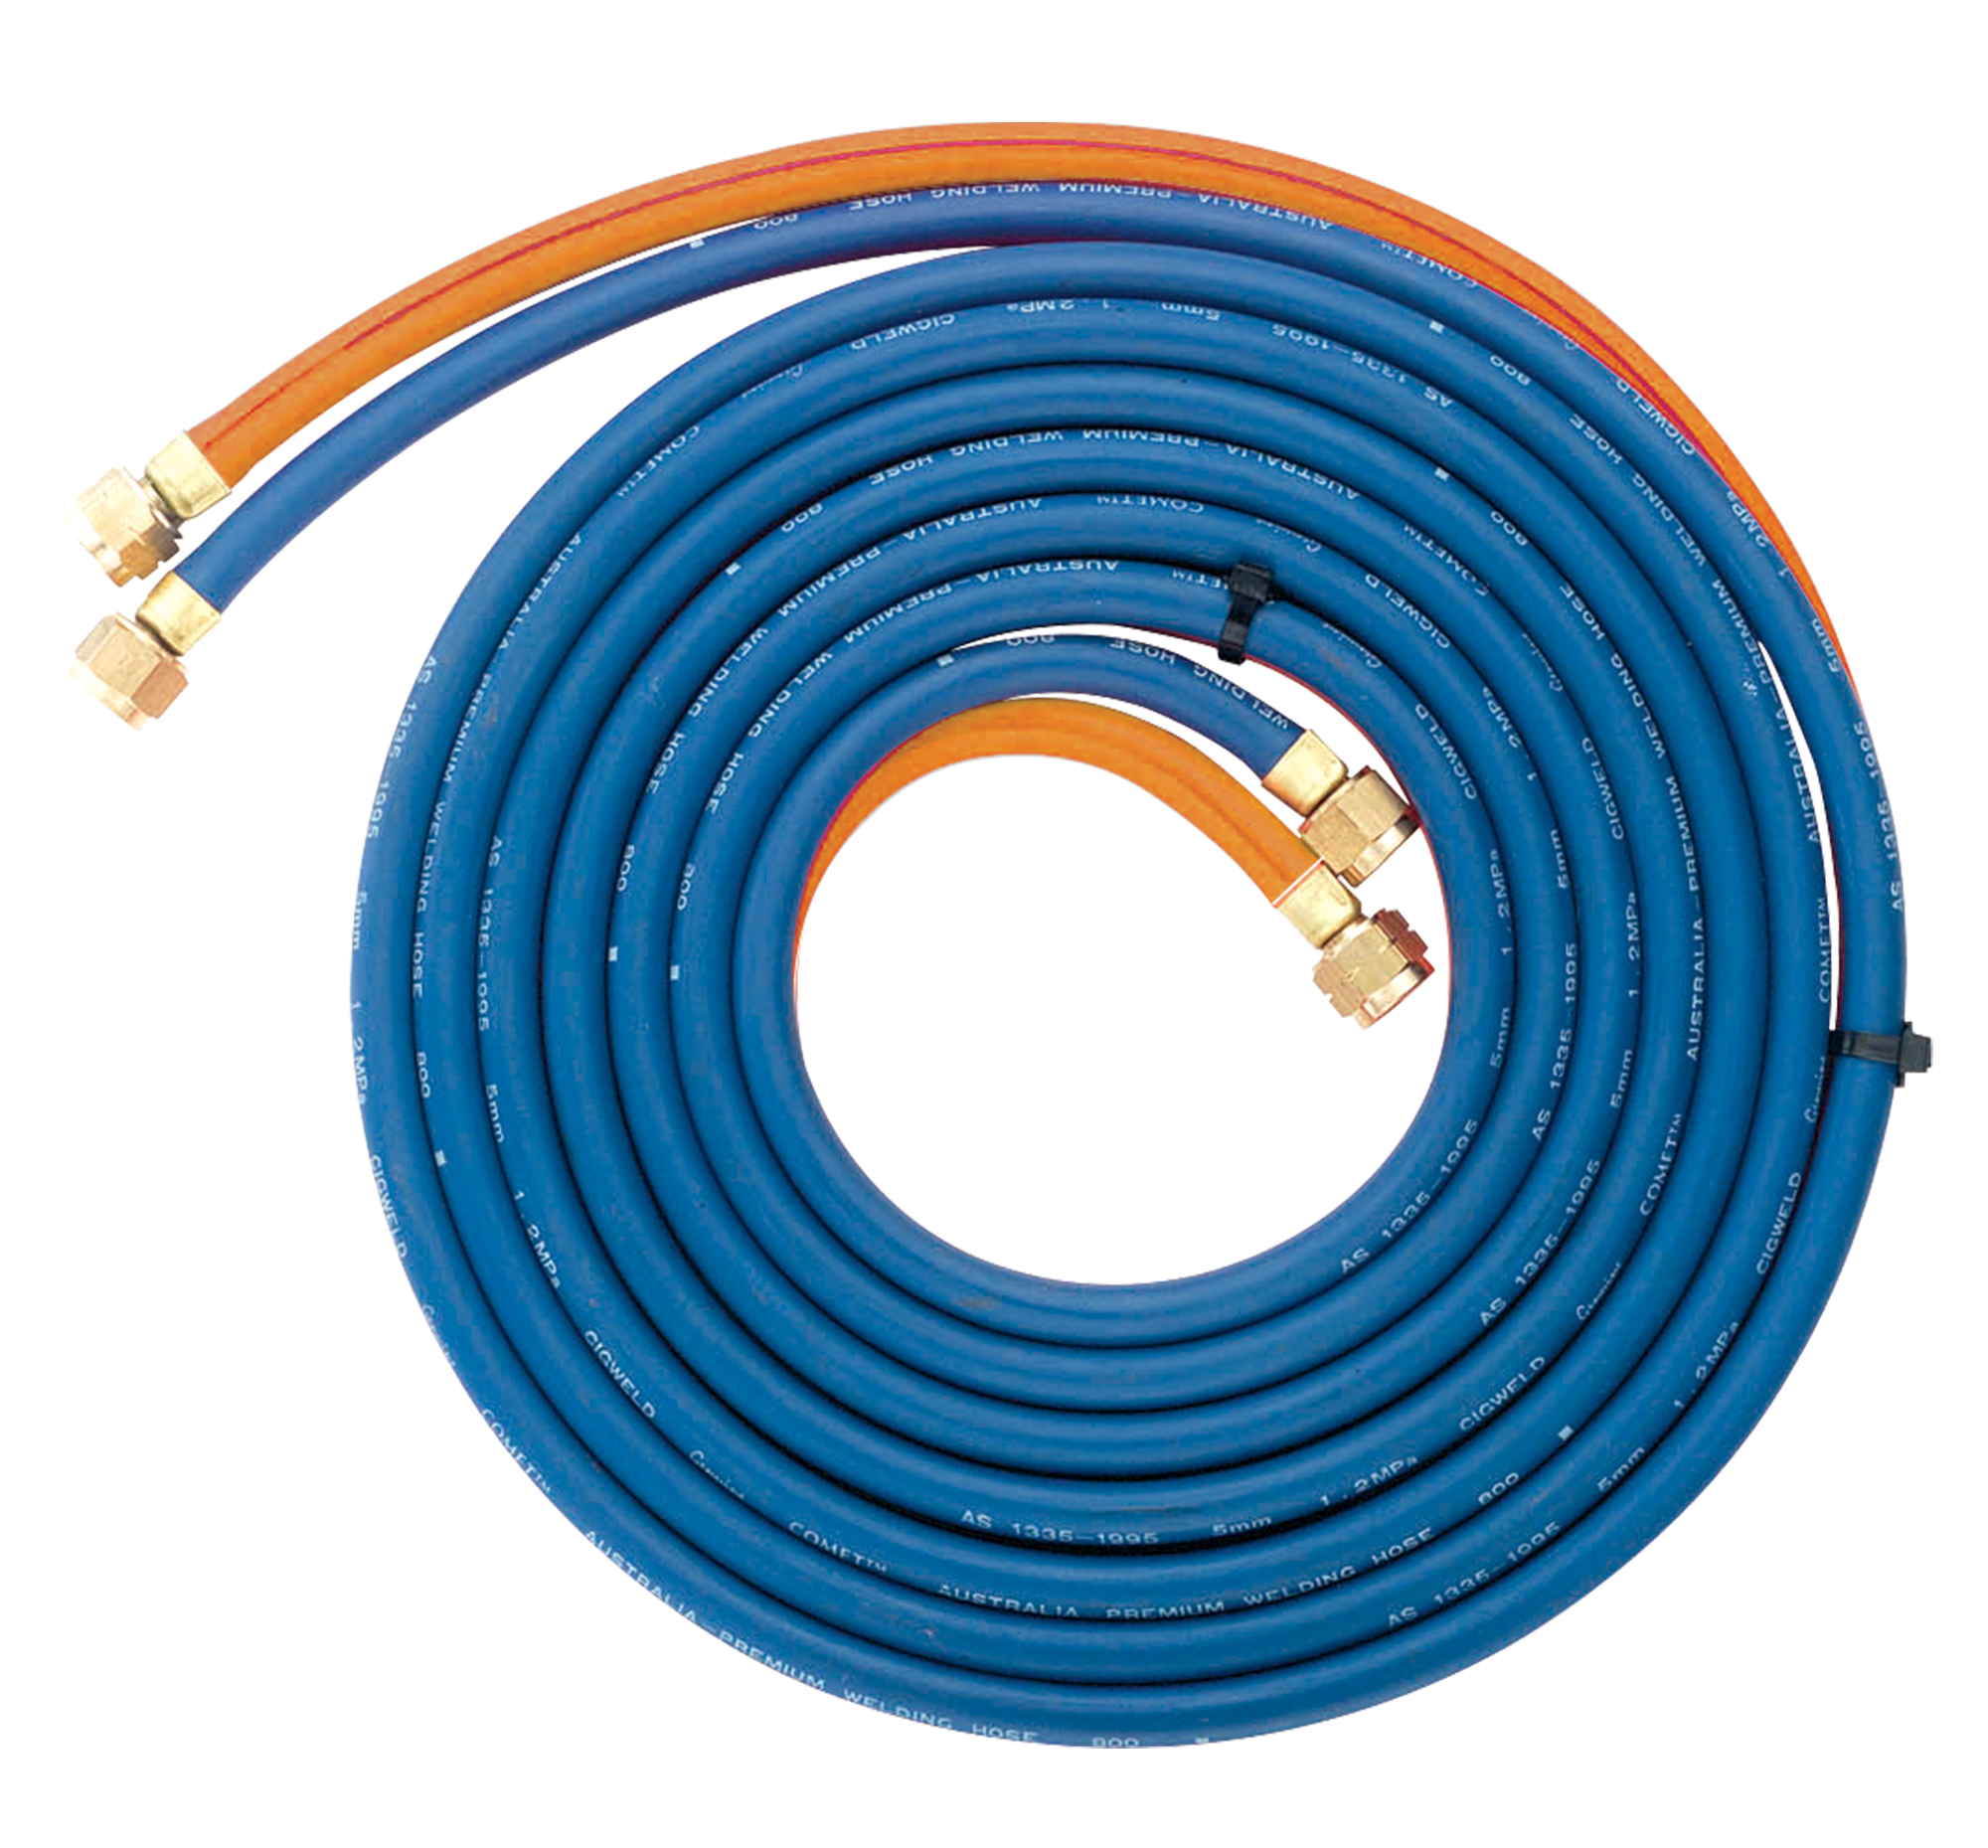 Cigweld COMET Fitted Twin Hose Oxy/LPG 5m